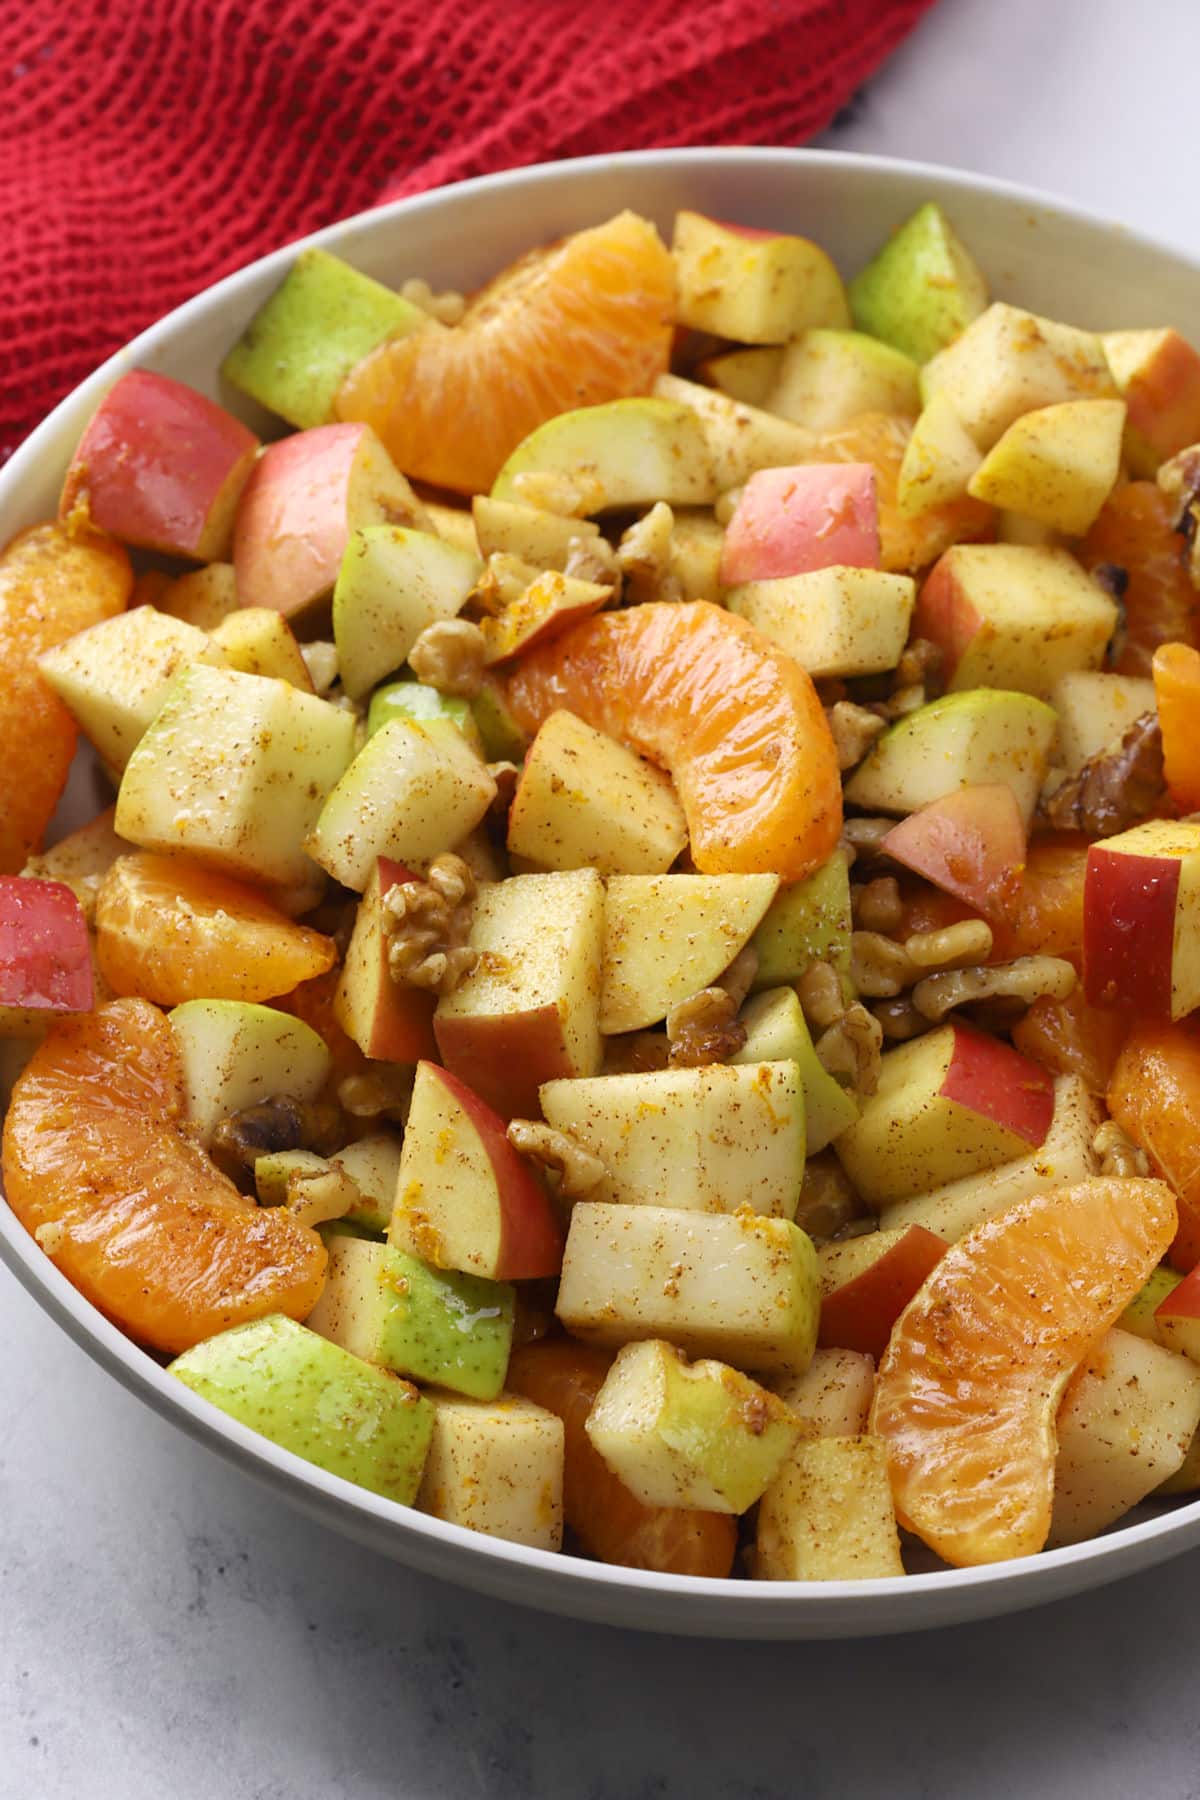 Winter fruit salad in a bowl.